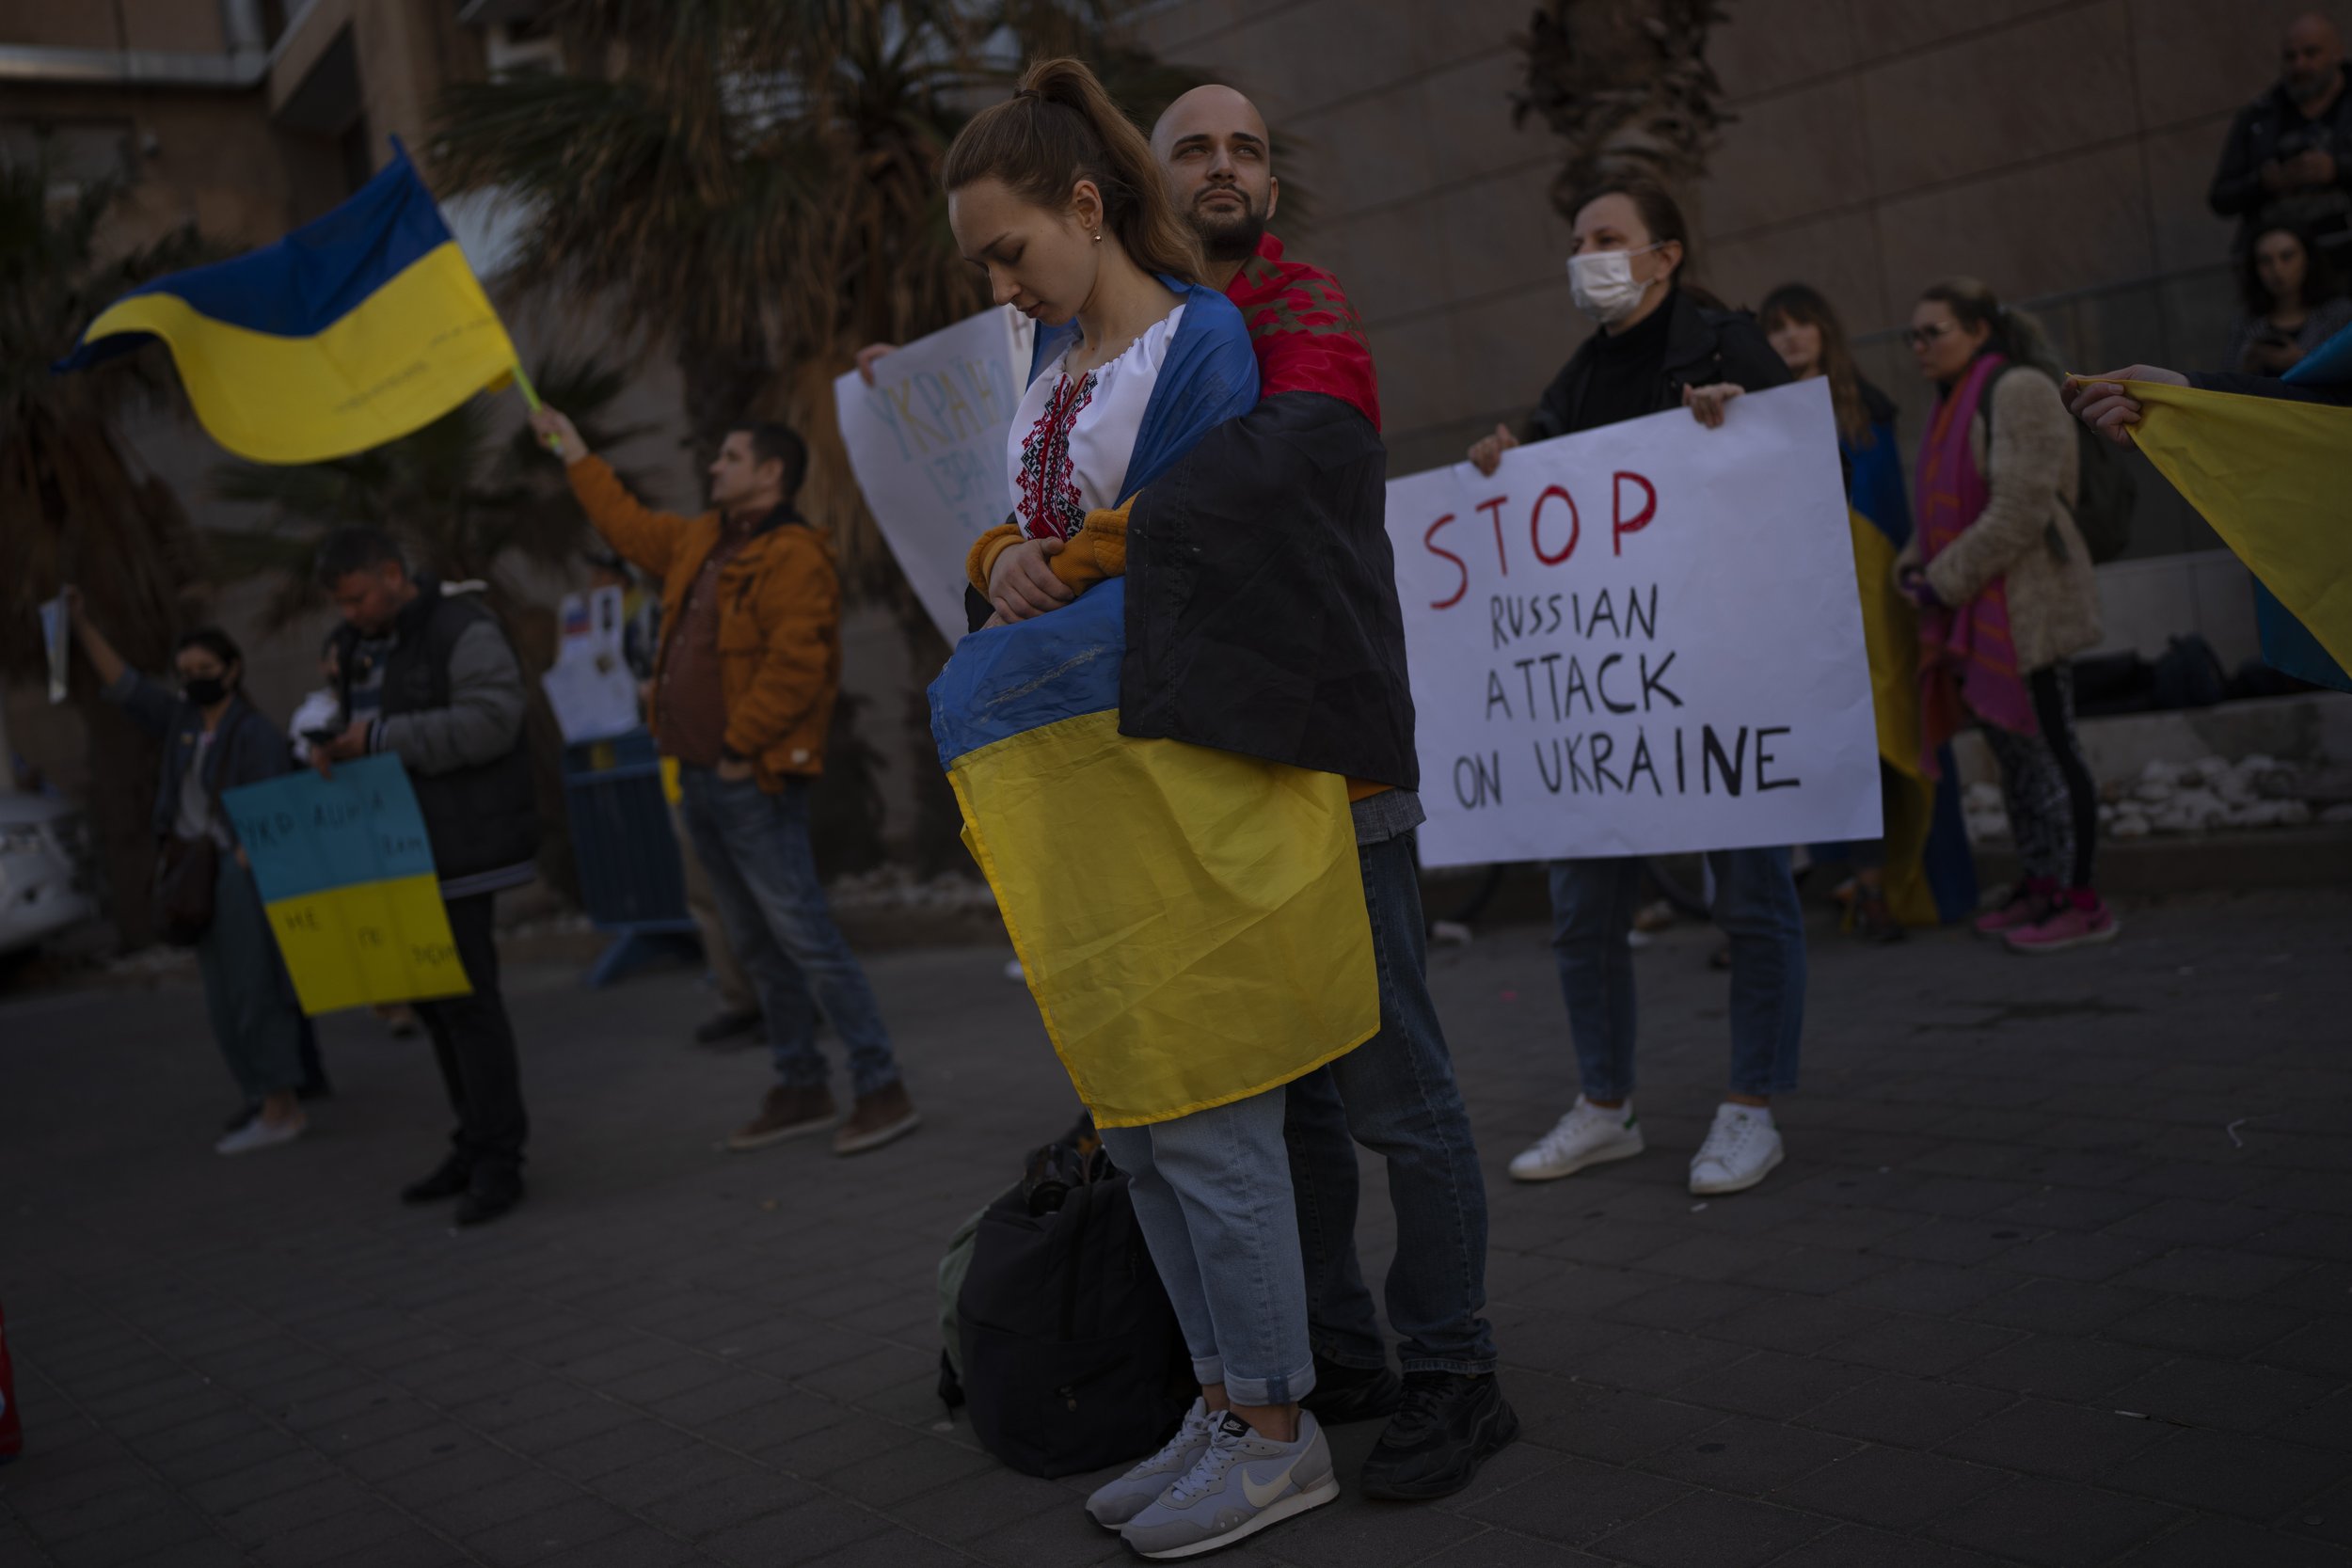  Demonstrators hold placards and flags as they attend a pro-Ukraine protest outside the Russian Embassy, after Russian troops have launched their anticipated attack on Ukraine, in Tel Aviv, Israel, Thursday, Feb. 24, 2022. (AP Photo/Oded Balilty) 